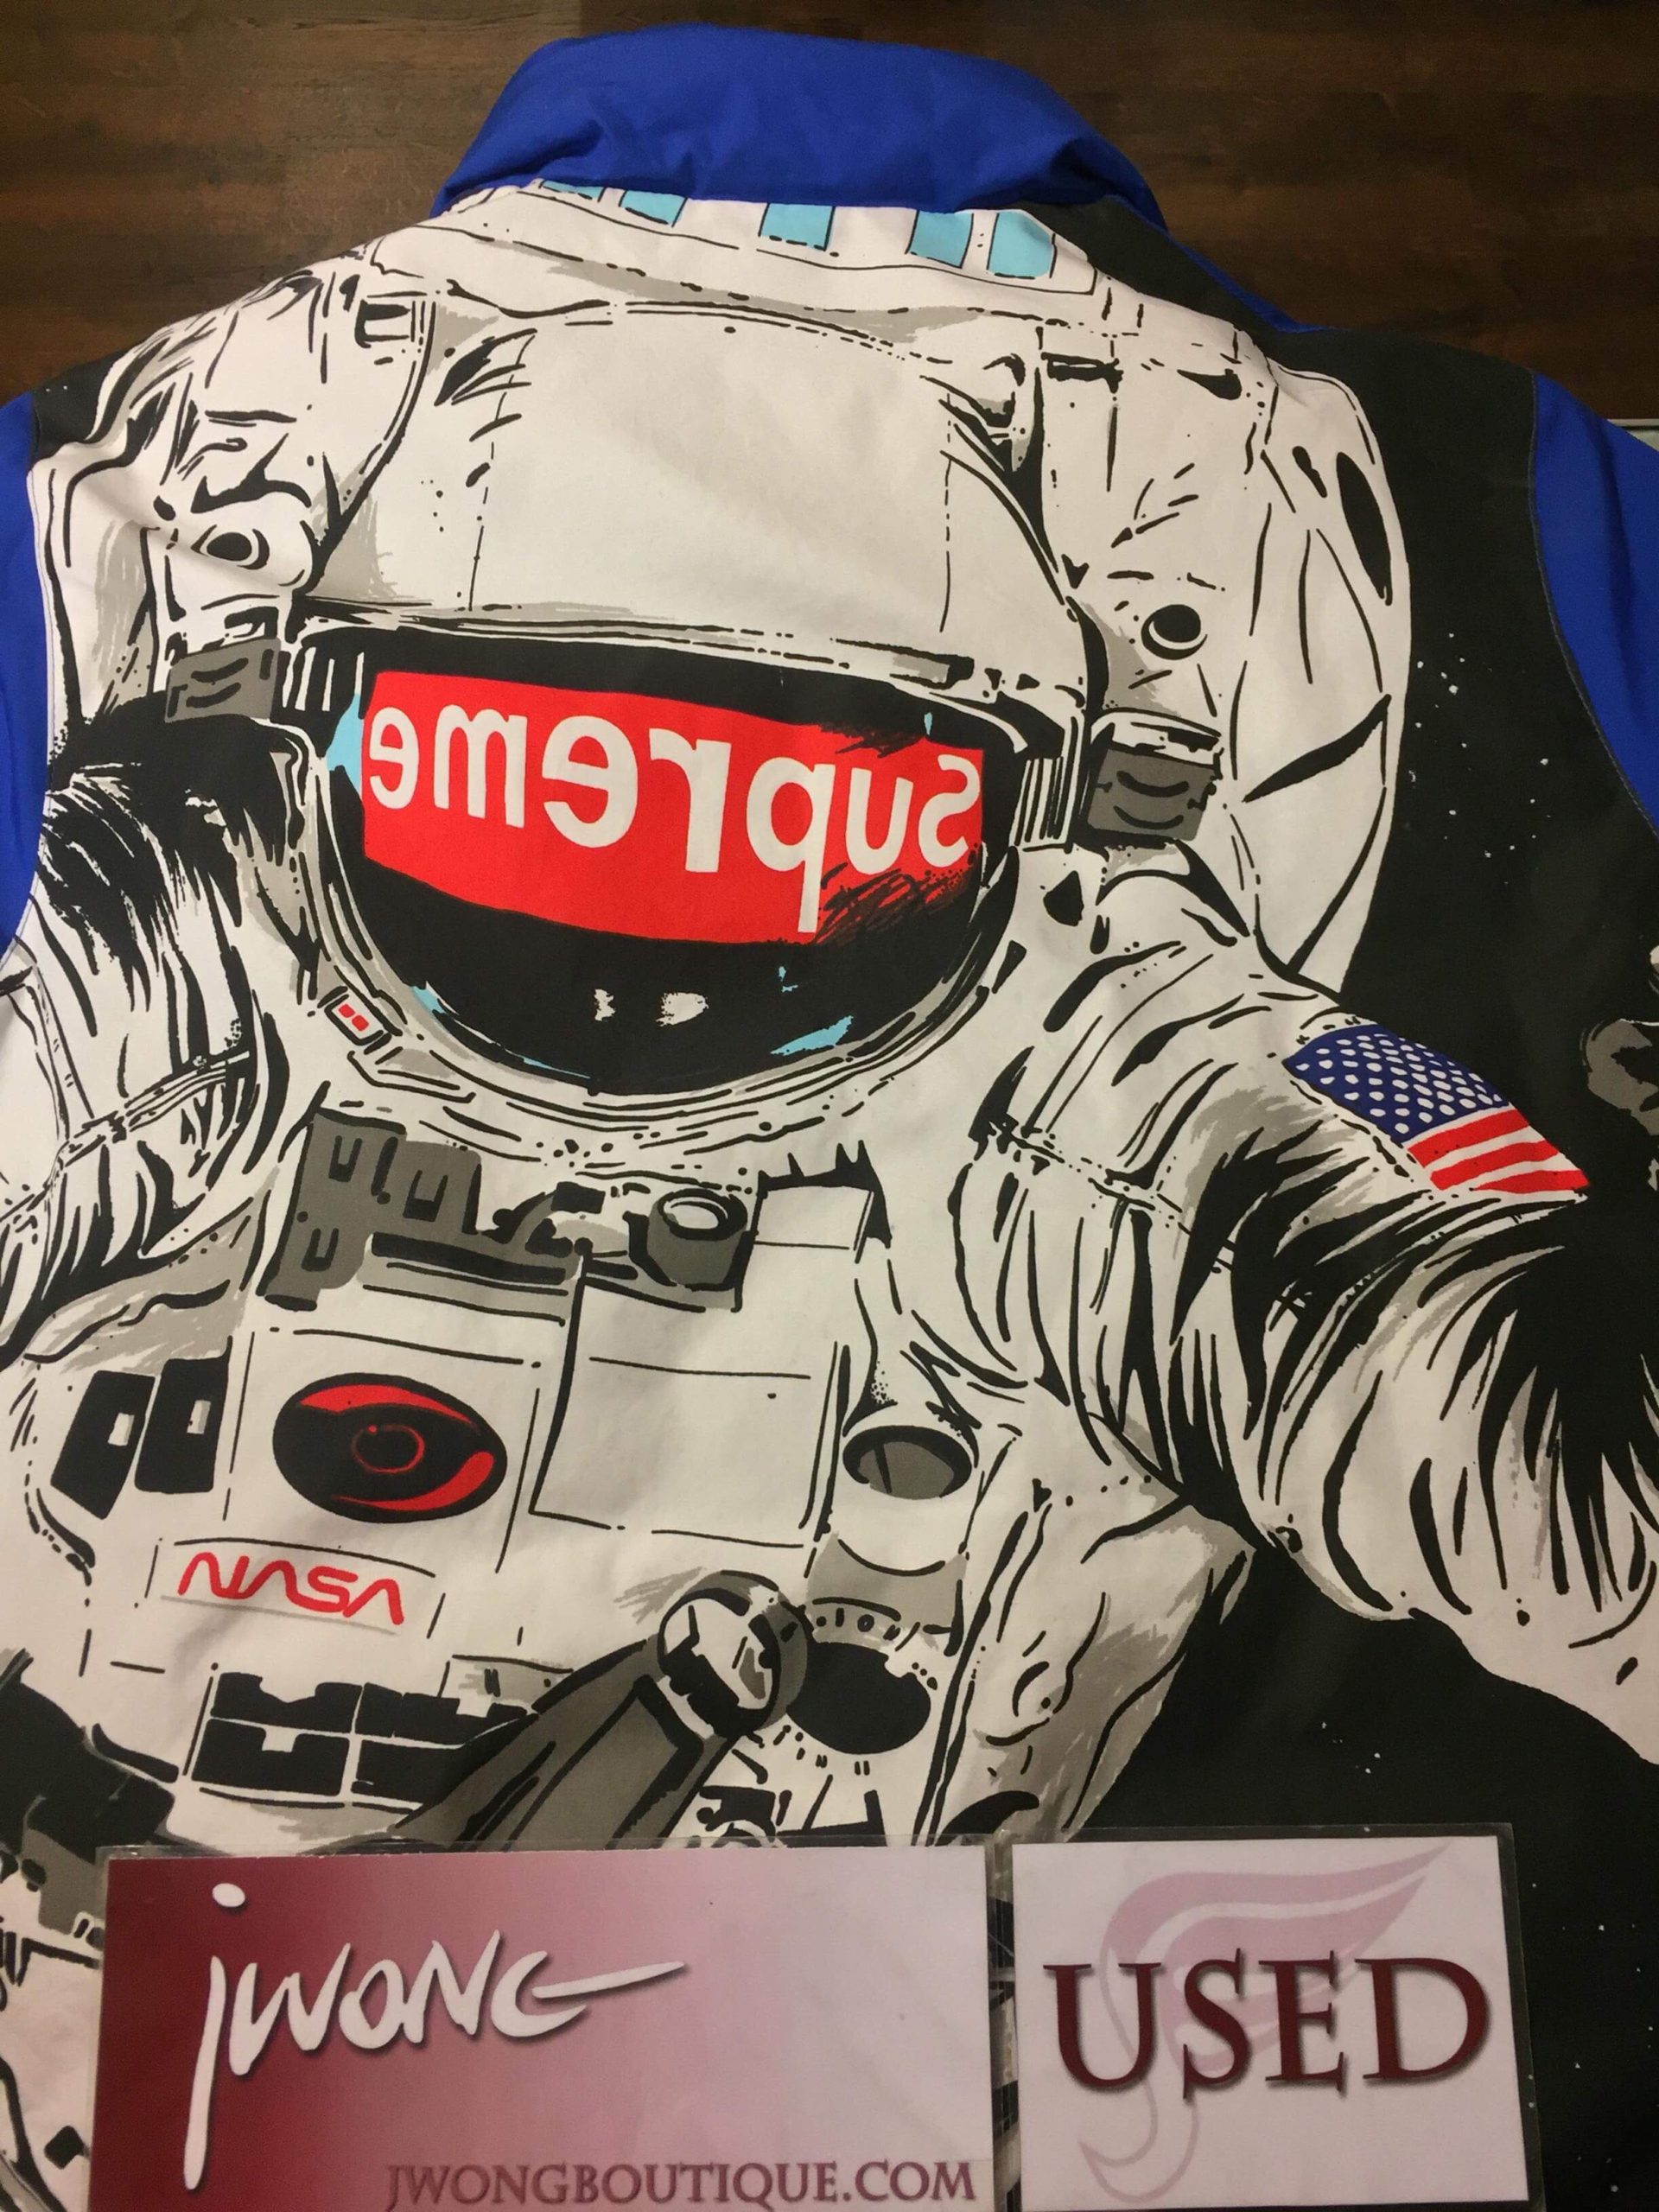 2016 Sup Astronaut Puffy Jacket Royal Blue - Jwong Boutique